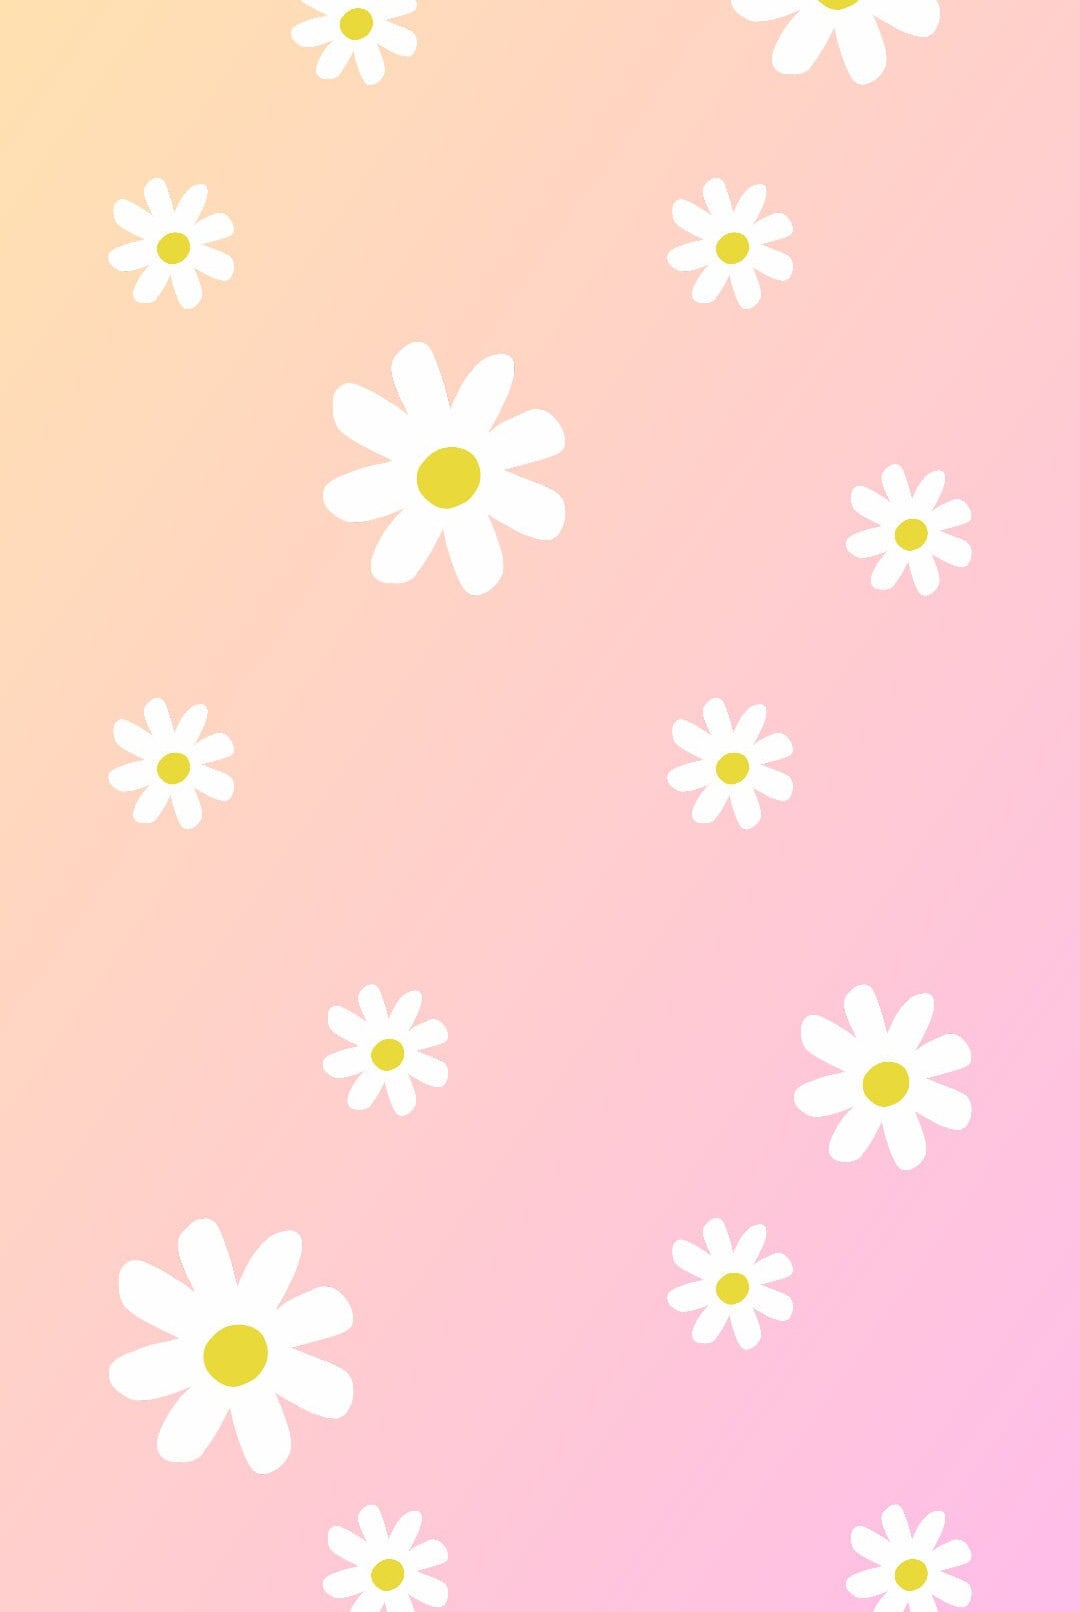 Download wallpaper 1125x2436 close up, pink daisy, bloom, iphone x,  1125x2436 hd background, 2708